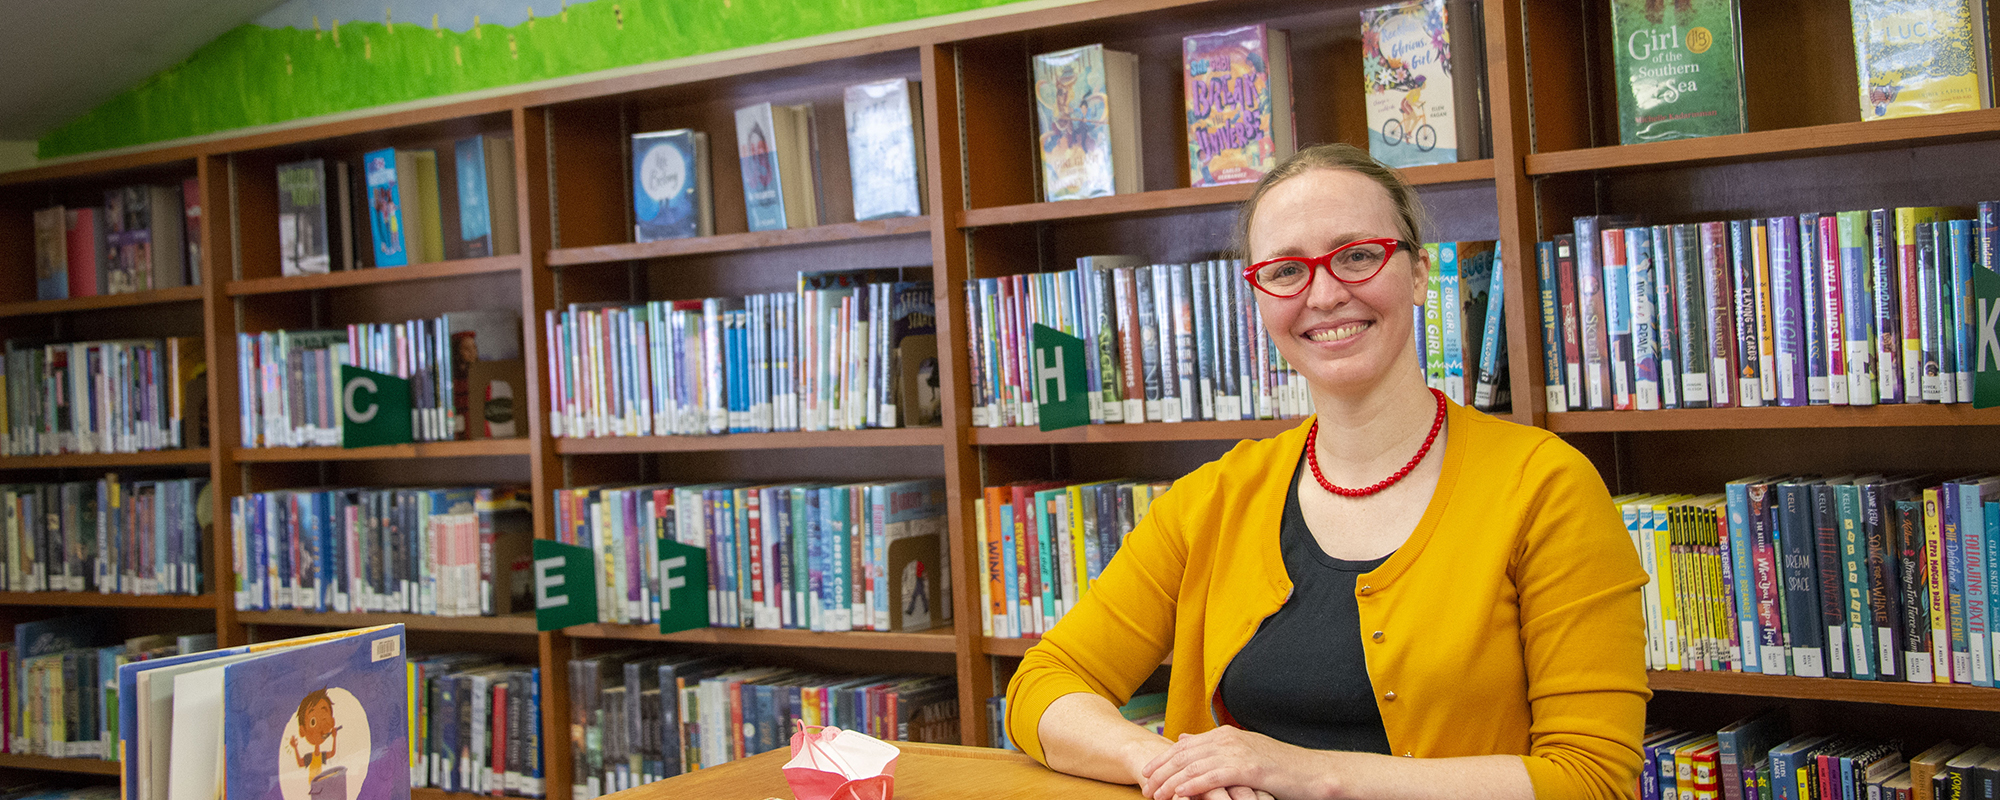 Childrens librarian smiles in front of wall of books